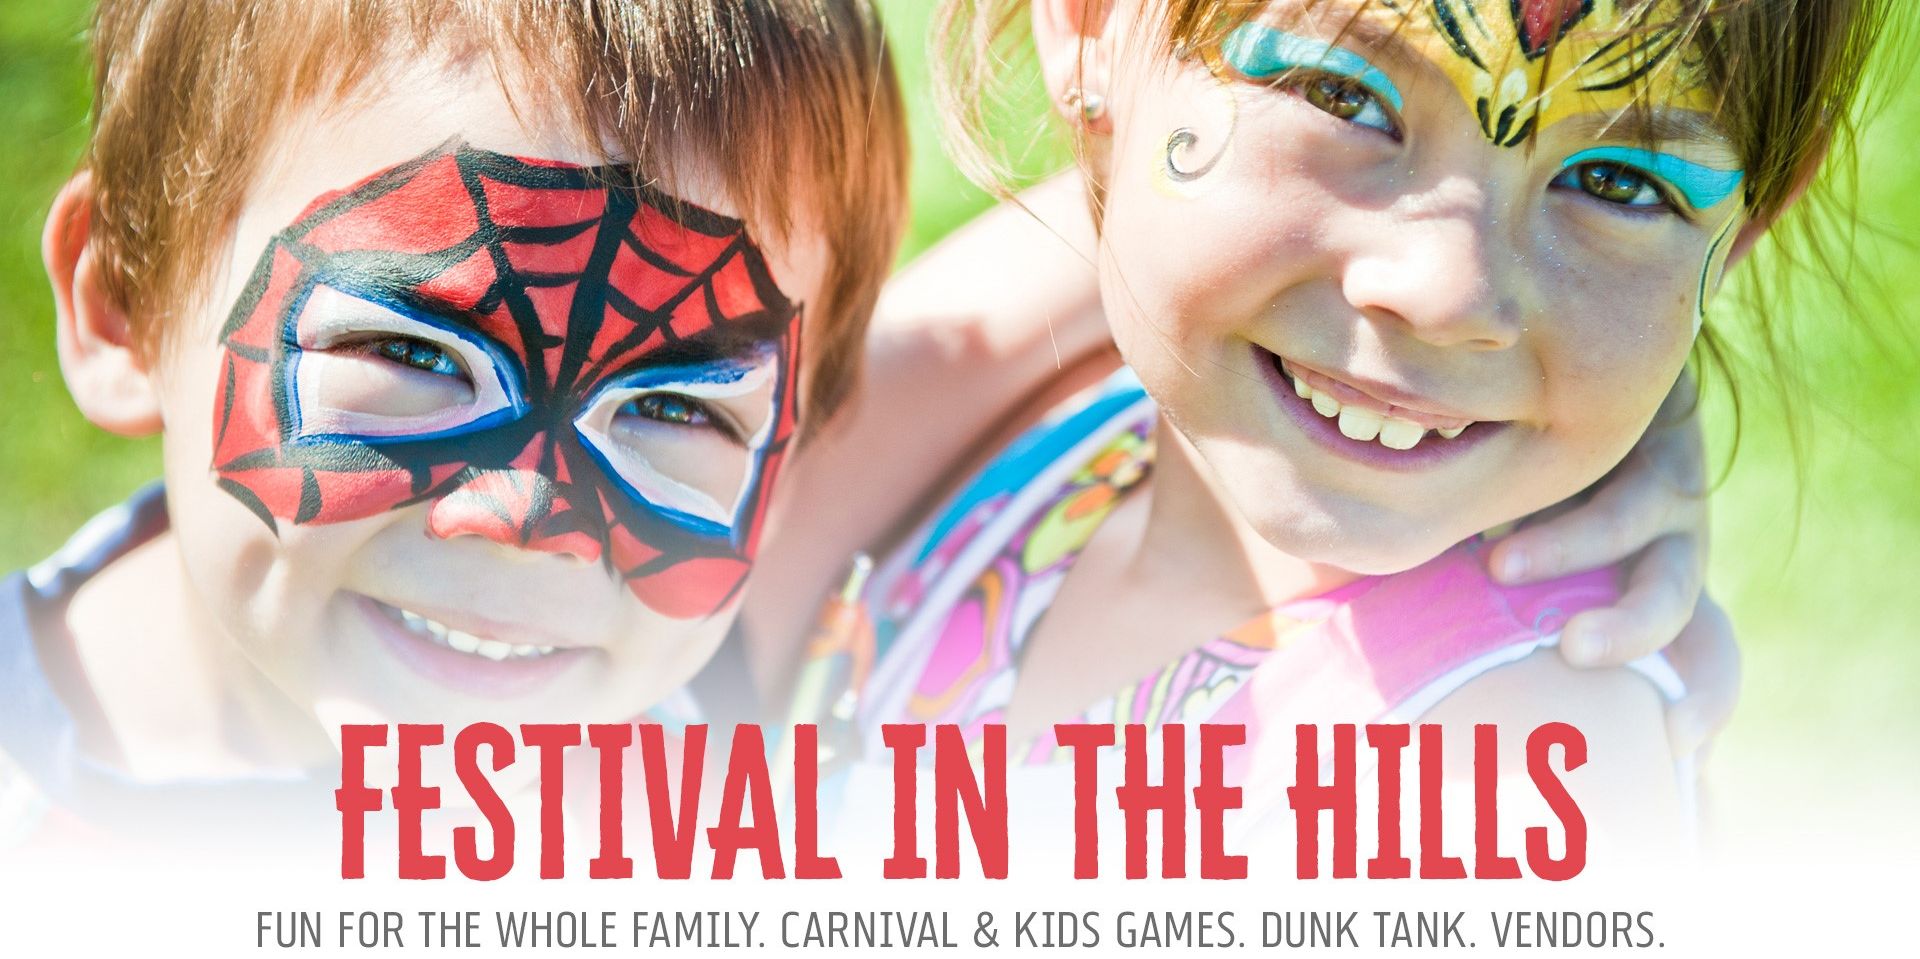 FESTIVAL IN THE HILLS promotional image